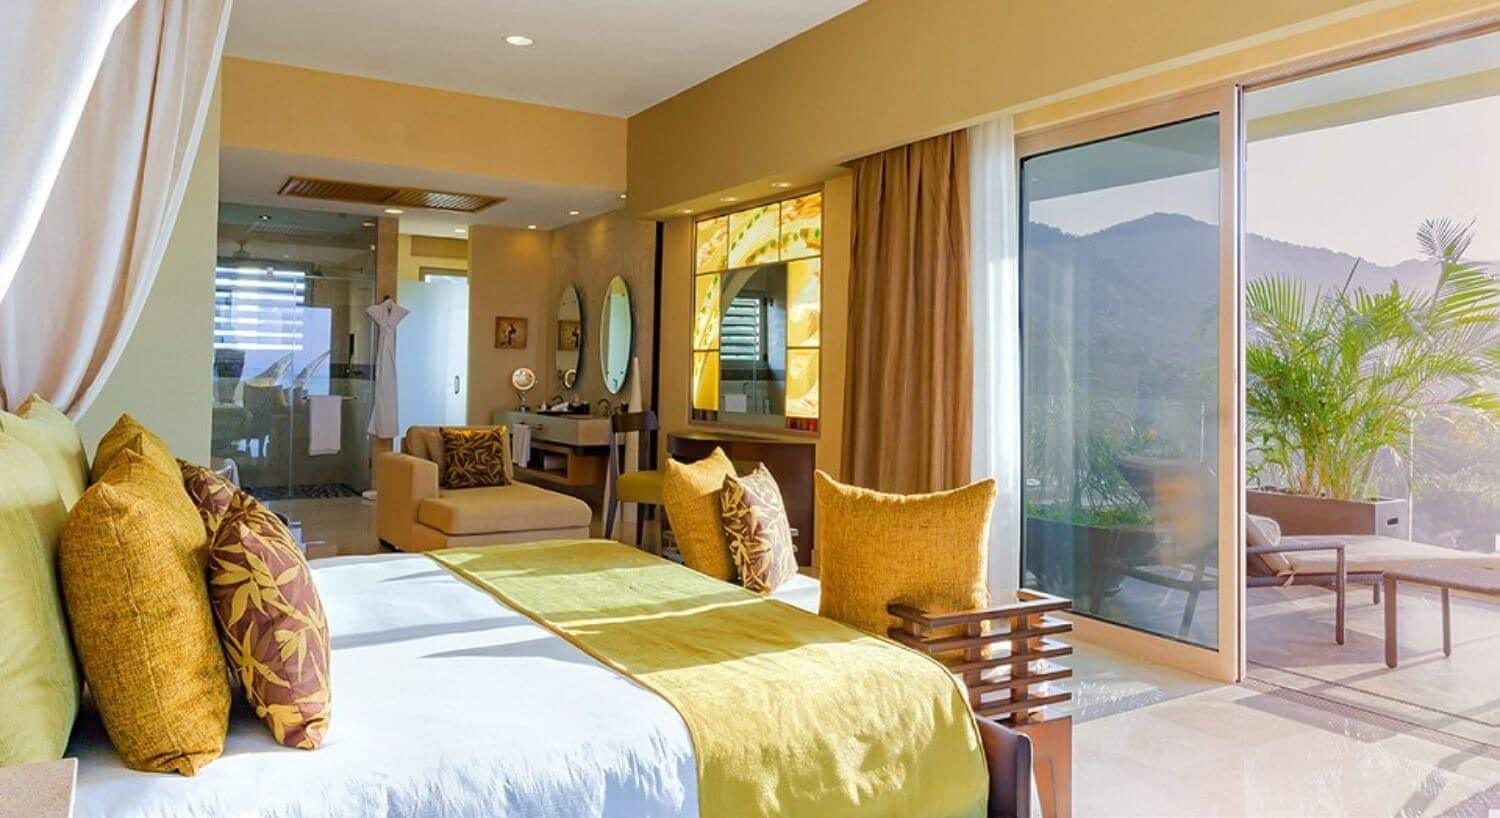 A bedroom with King bed with white, yellow and brown bedding, a plush chaise lounge chair, vanity table with lit mirror, bathroom with shower, and sliding doors leading out to a private balcony with lounge chair, green palm bushes, and views of the mountains.